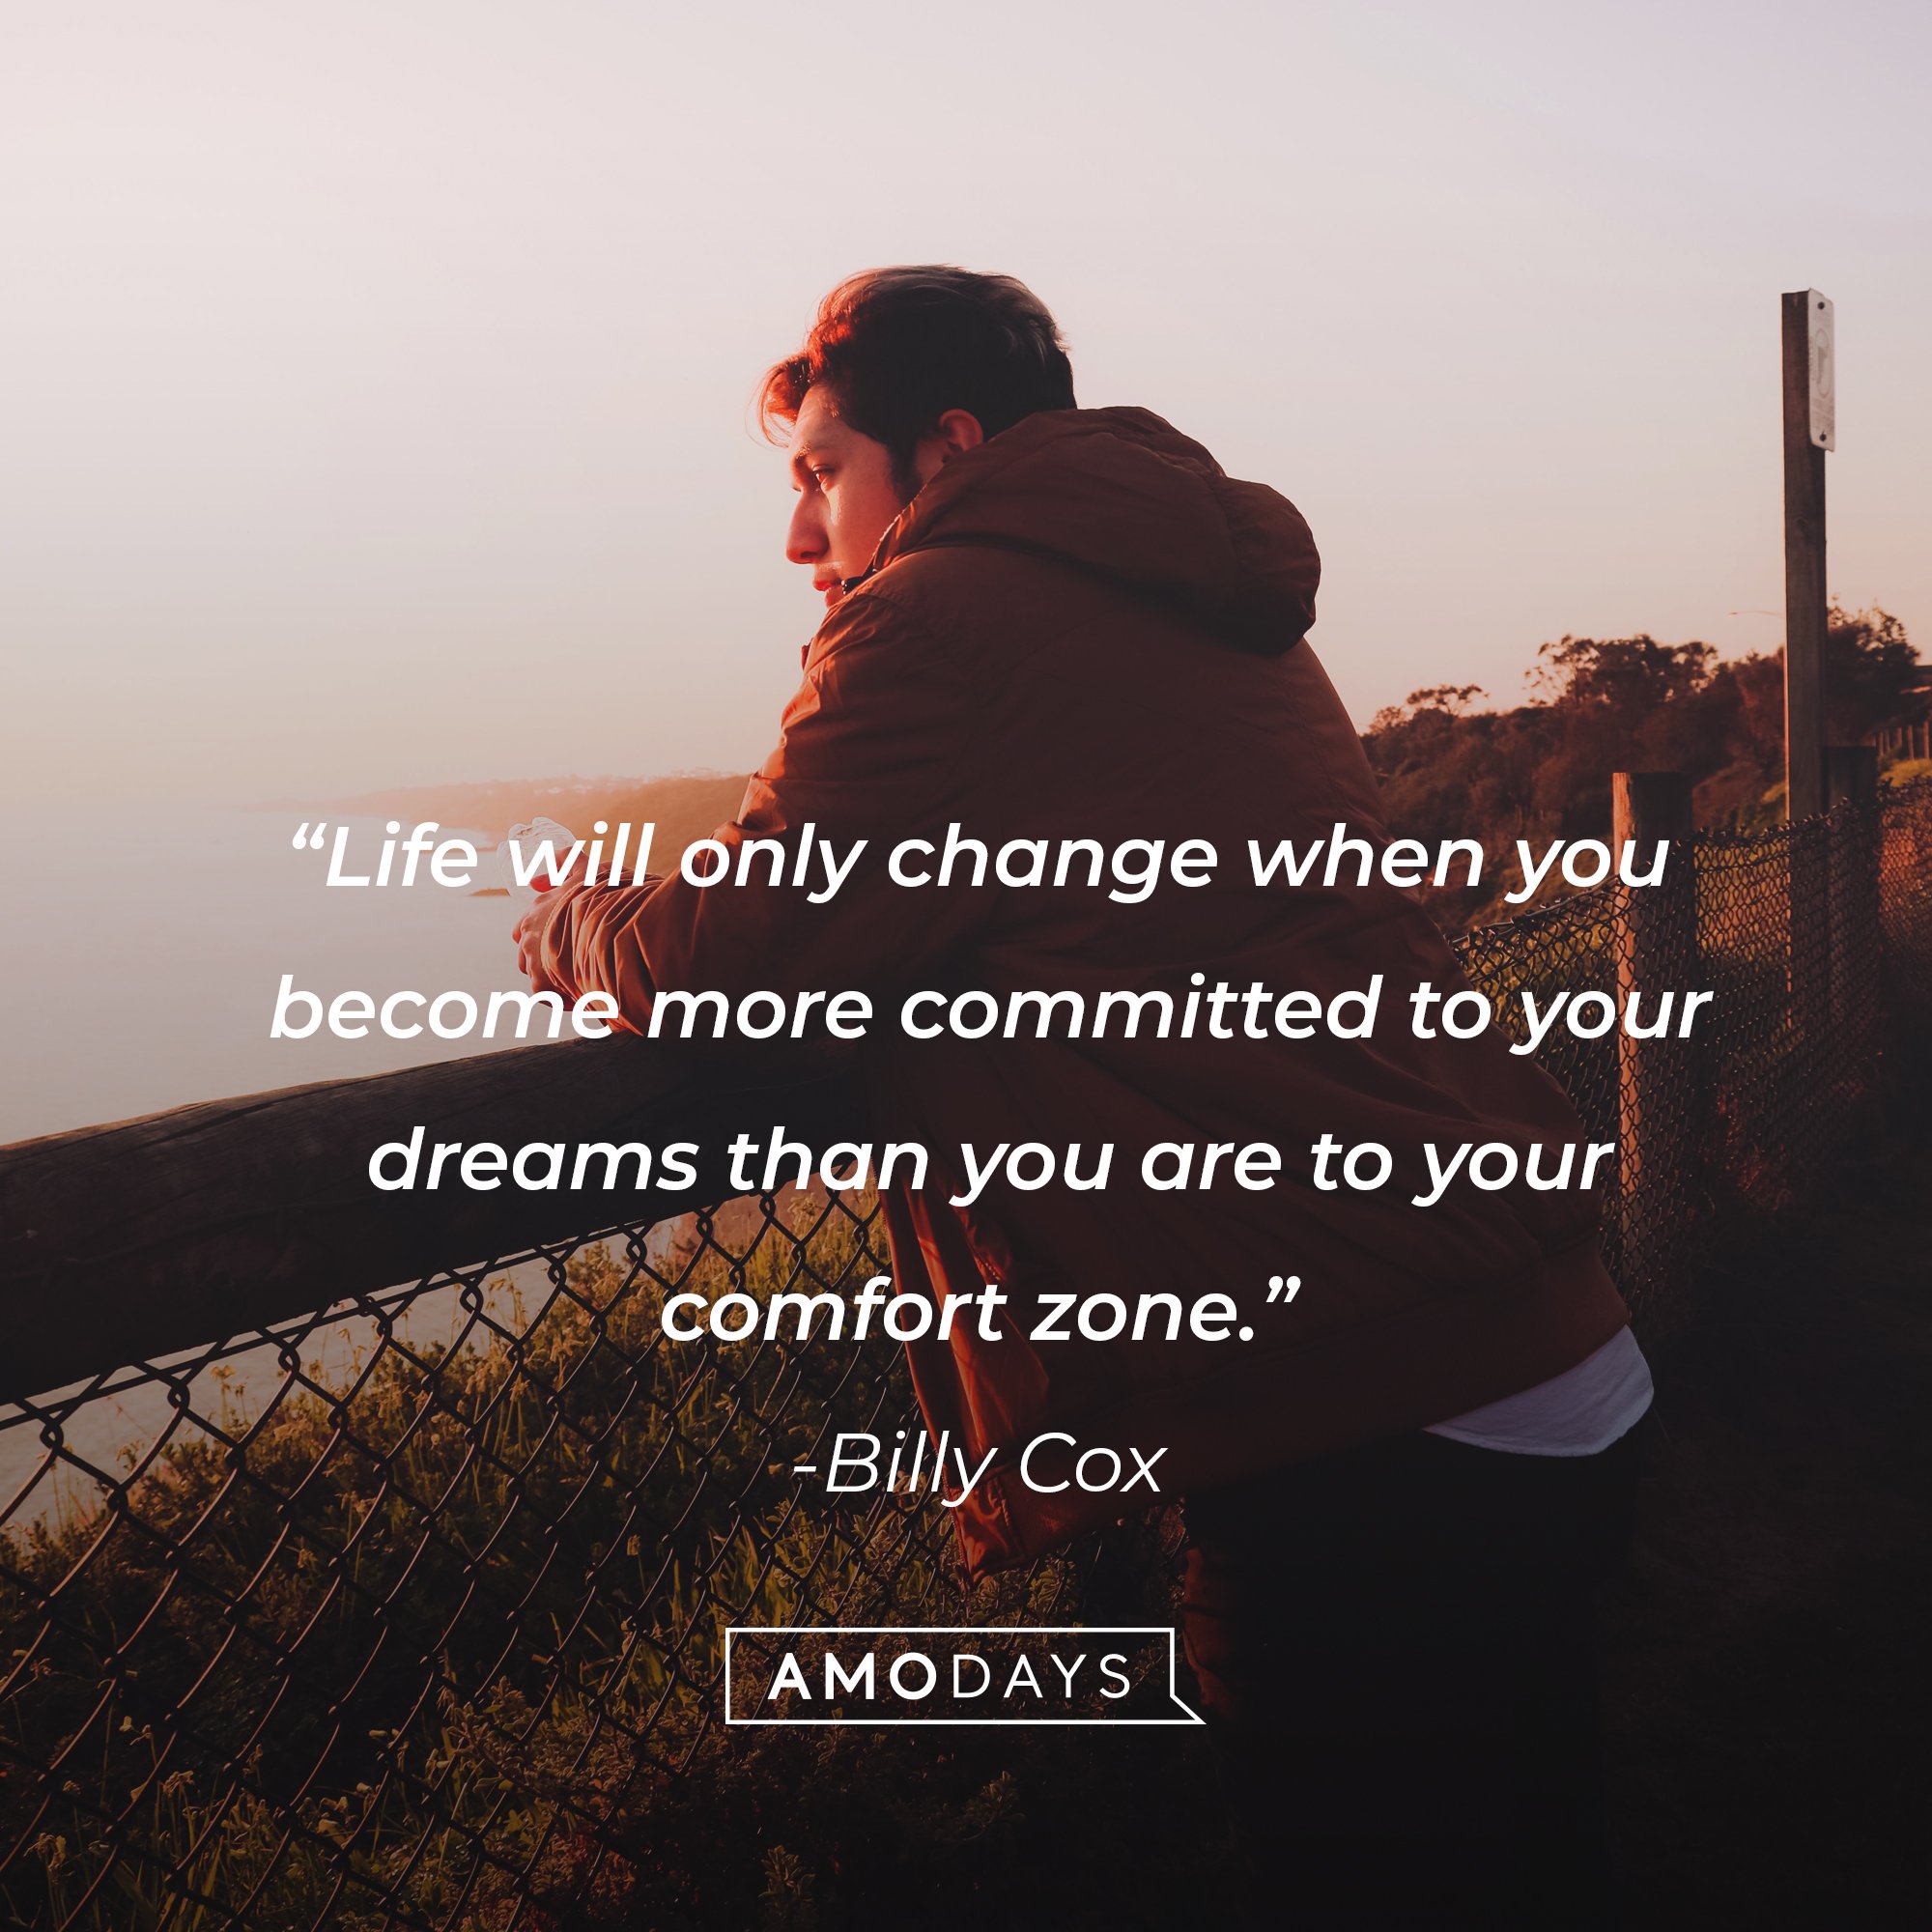 Billy Cox's quote: “Life will only change when you become more committed to your dreams than you are to your comfort zone.” | Image: AmoDays